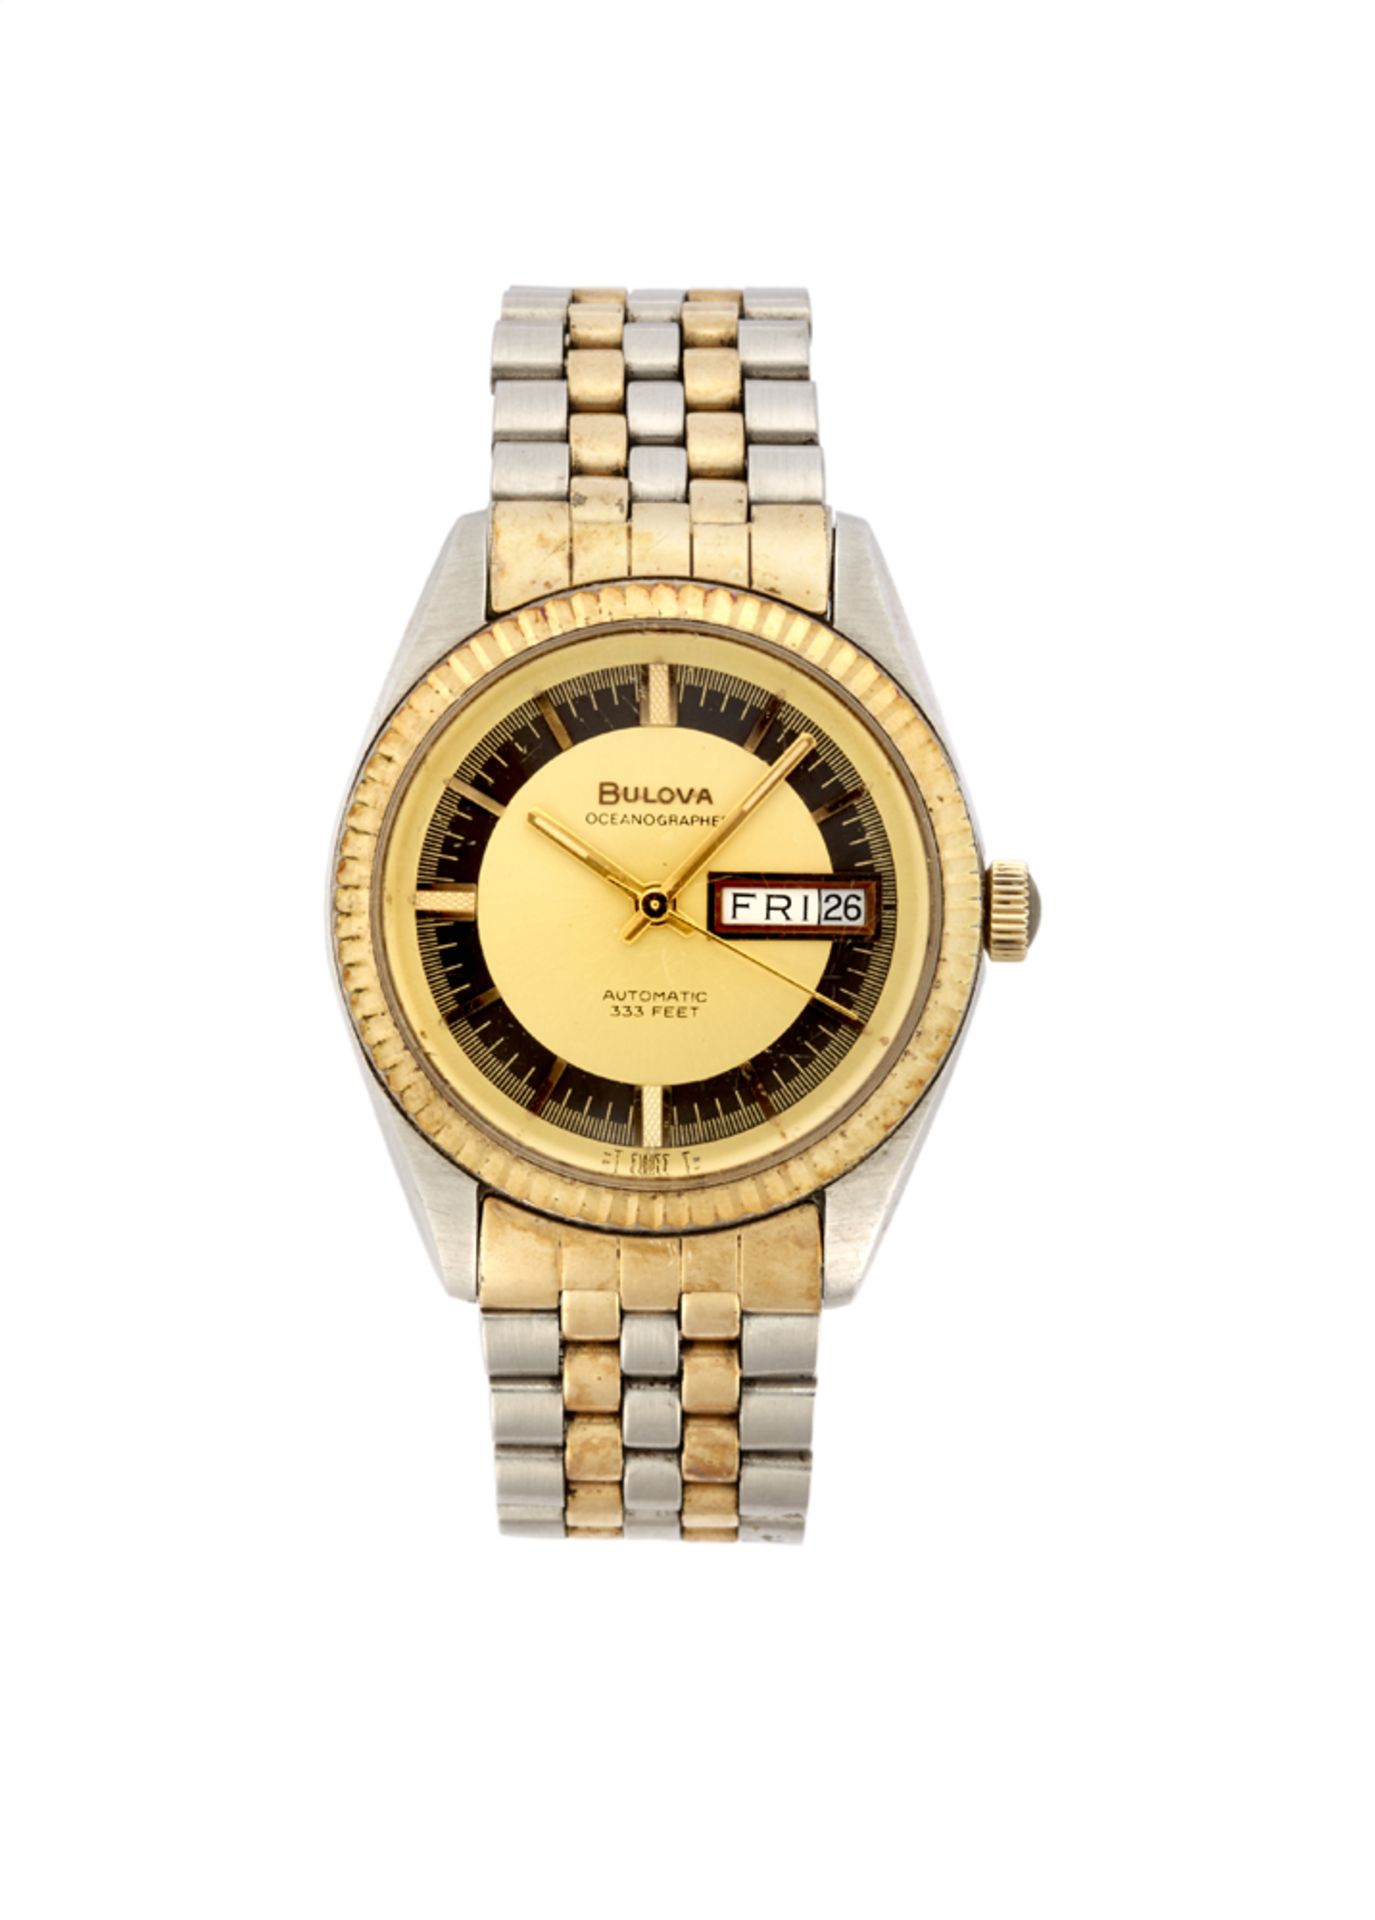 BULOVA OCEANOGRAPHERGent's Steel and metal plated-gold wristwatch1970sDial, movement and case